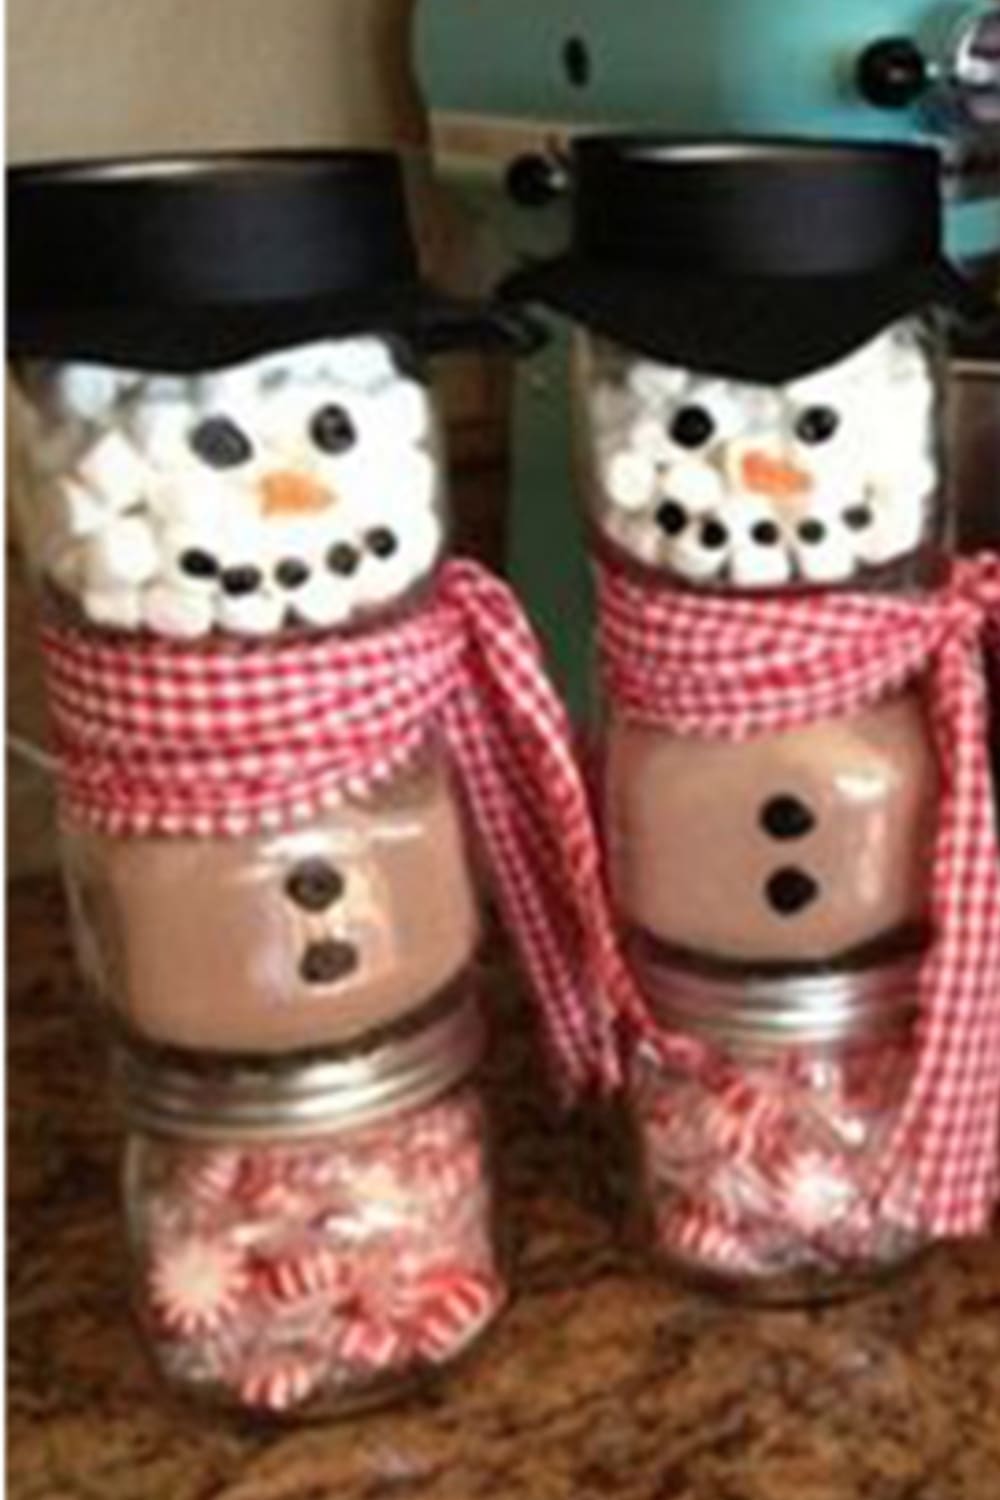 Mason Jar Christmas Gifts and Crafts - Easy Mason Jar Christmas Gift Ideas for Homemade Holiday Gifts for Neighbors, teachers, friends, co-workers and family. Easy DIY Christmas mason jars and Christmas mason jar decorating ideas - how to decorate mason jars for Christmas gifts - DIY Mason Jar Gifts and Cute Mason Jar Ideas For Christmas Presents - Snowmen made out of mason jars